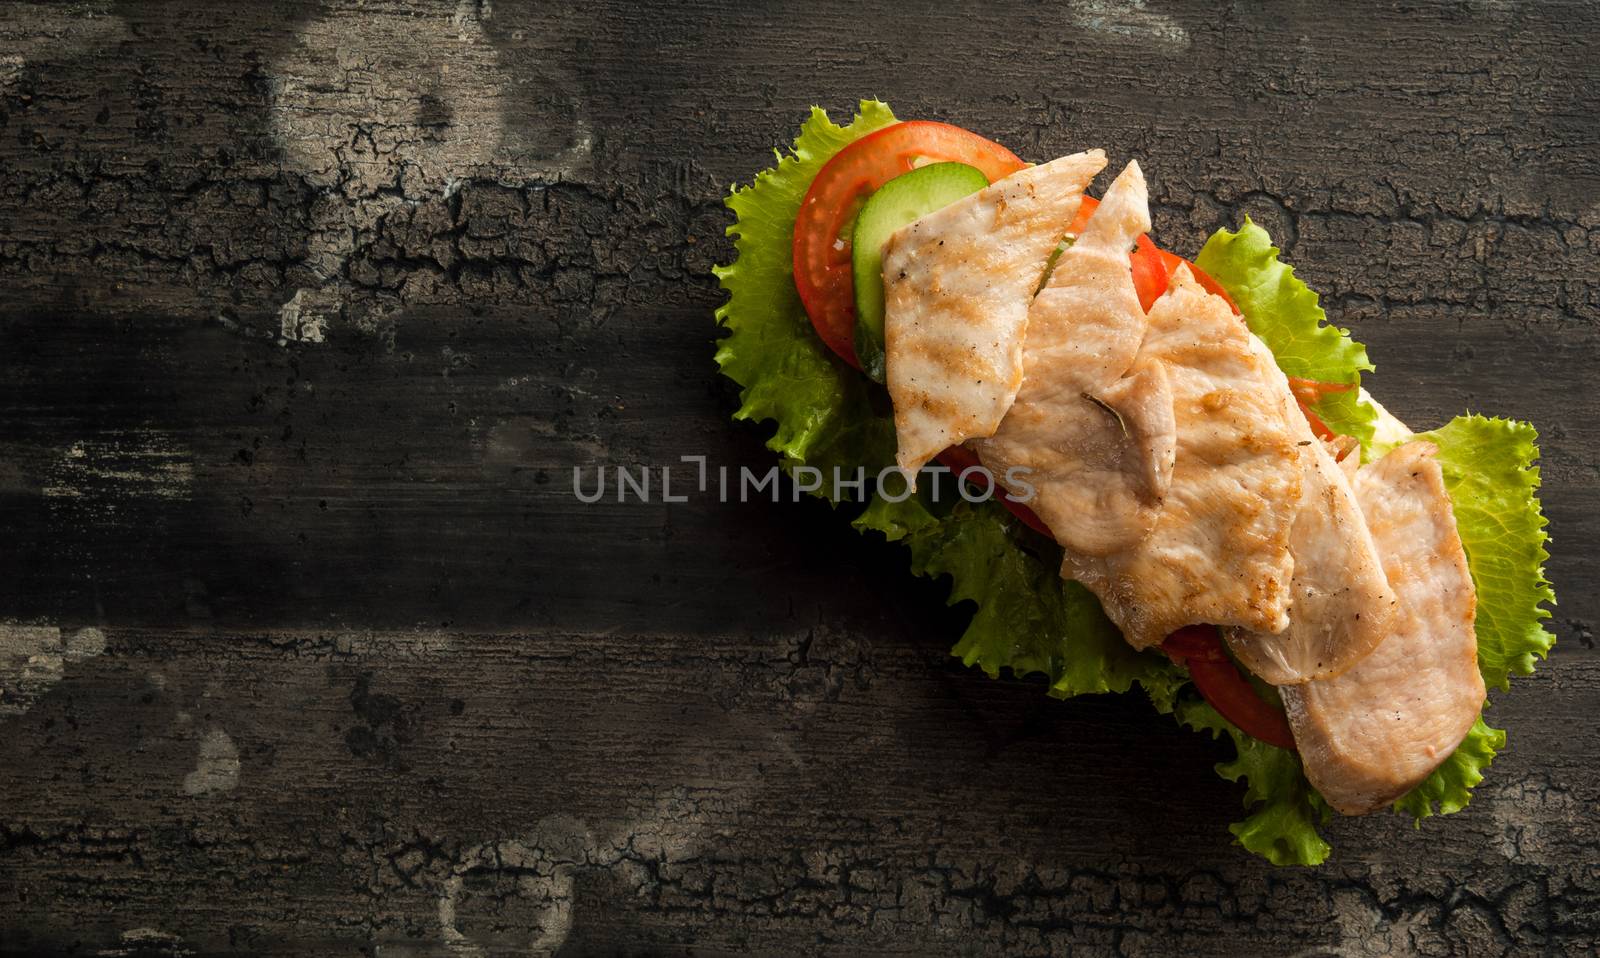 cheeseburger on a wooden surface by A_Karim